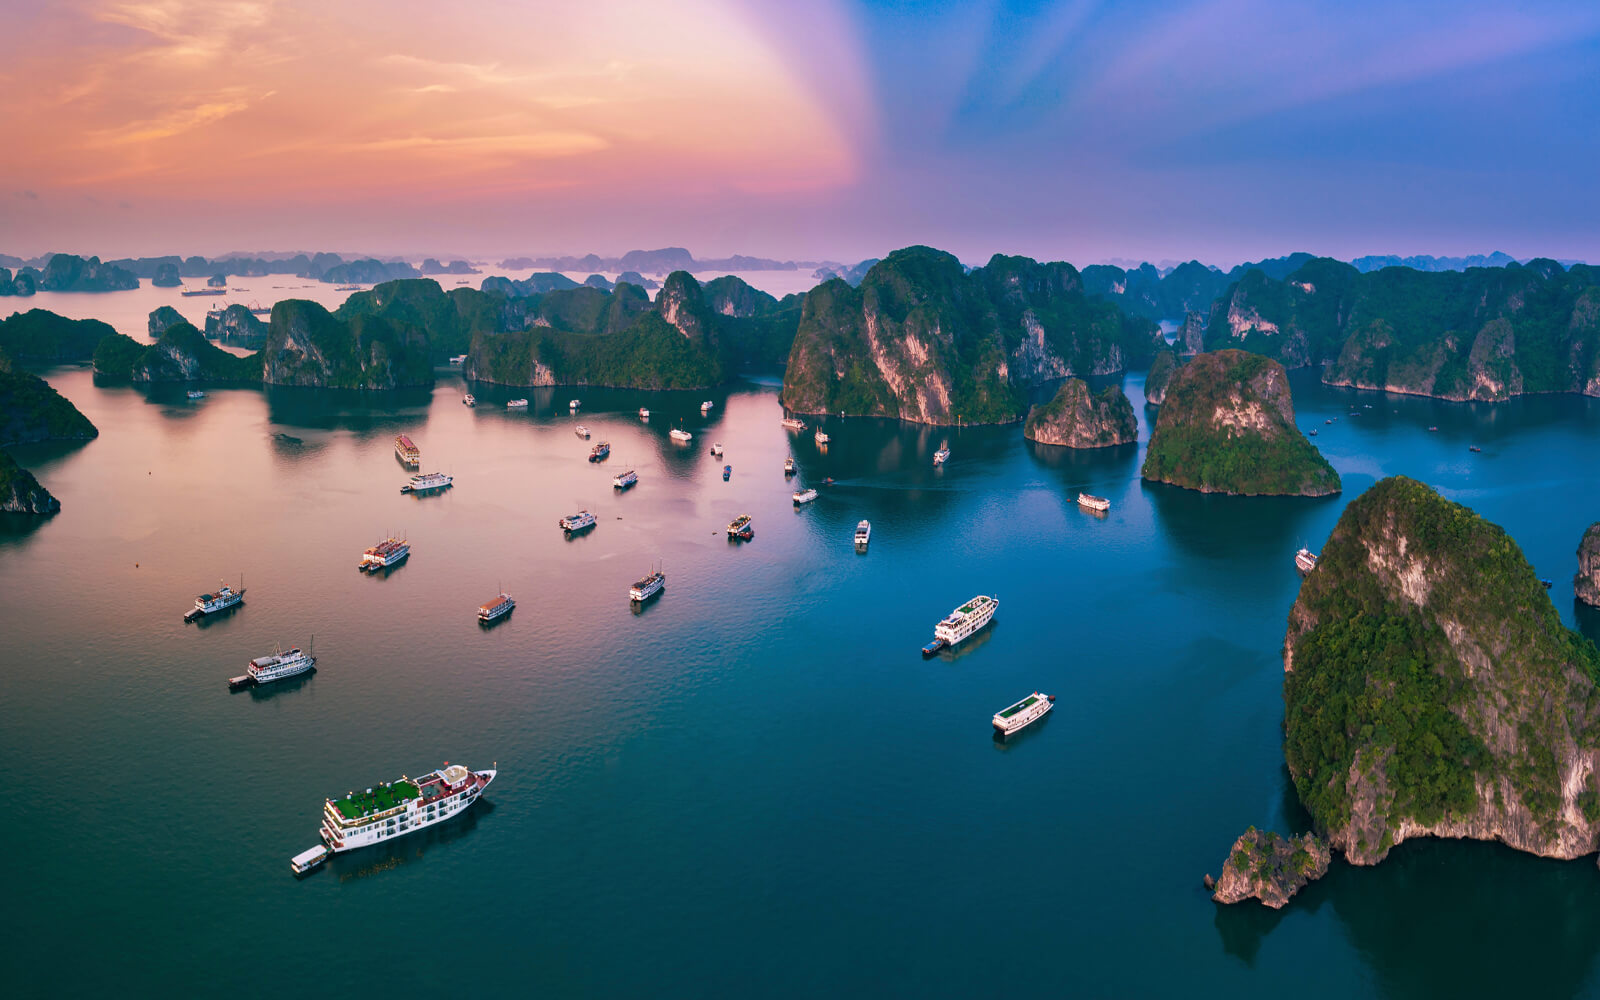 Book your adventure now and experience the best that Vietnam has to offer